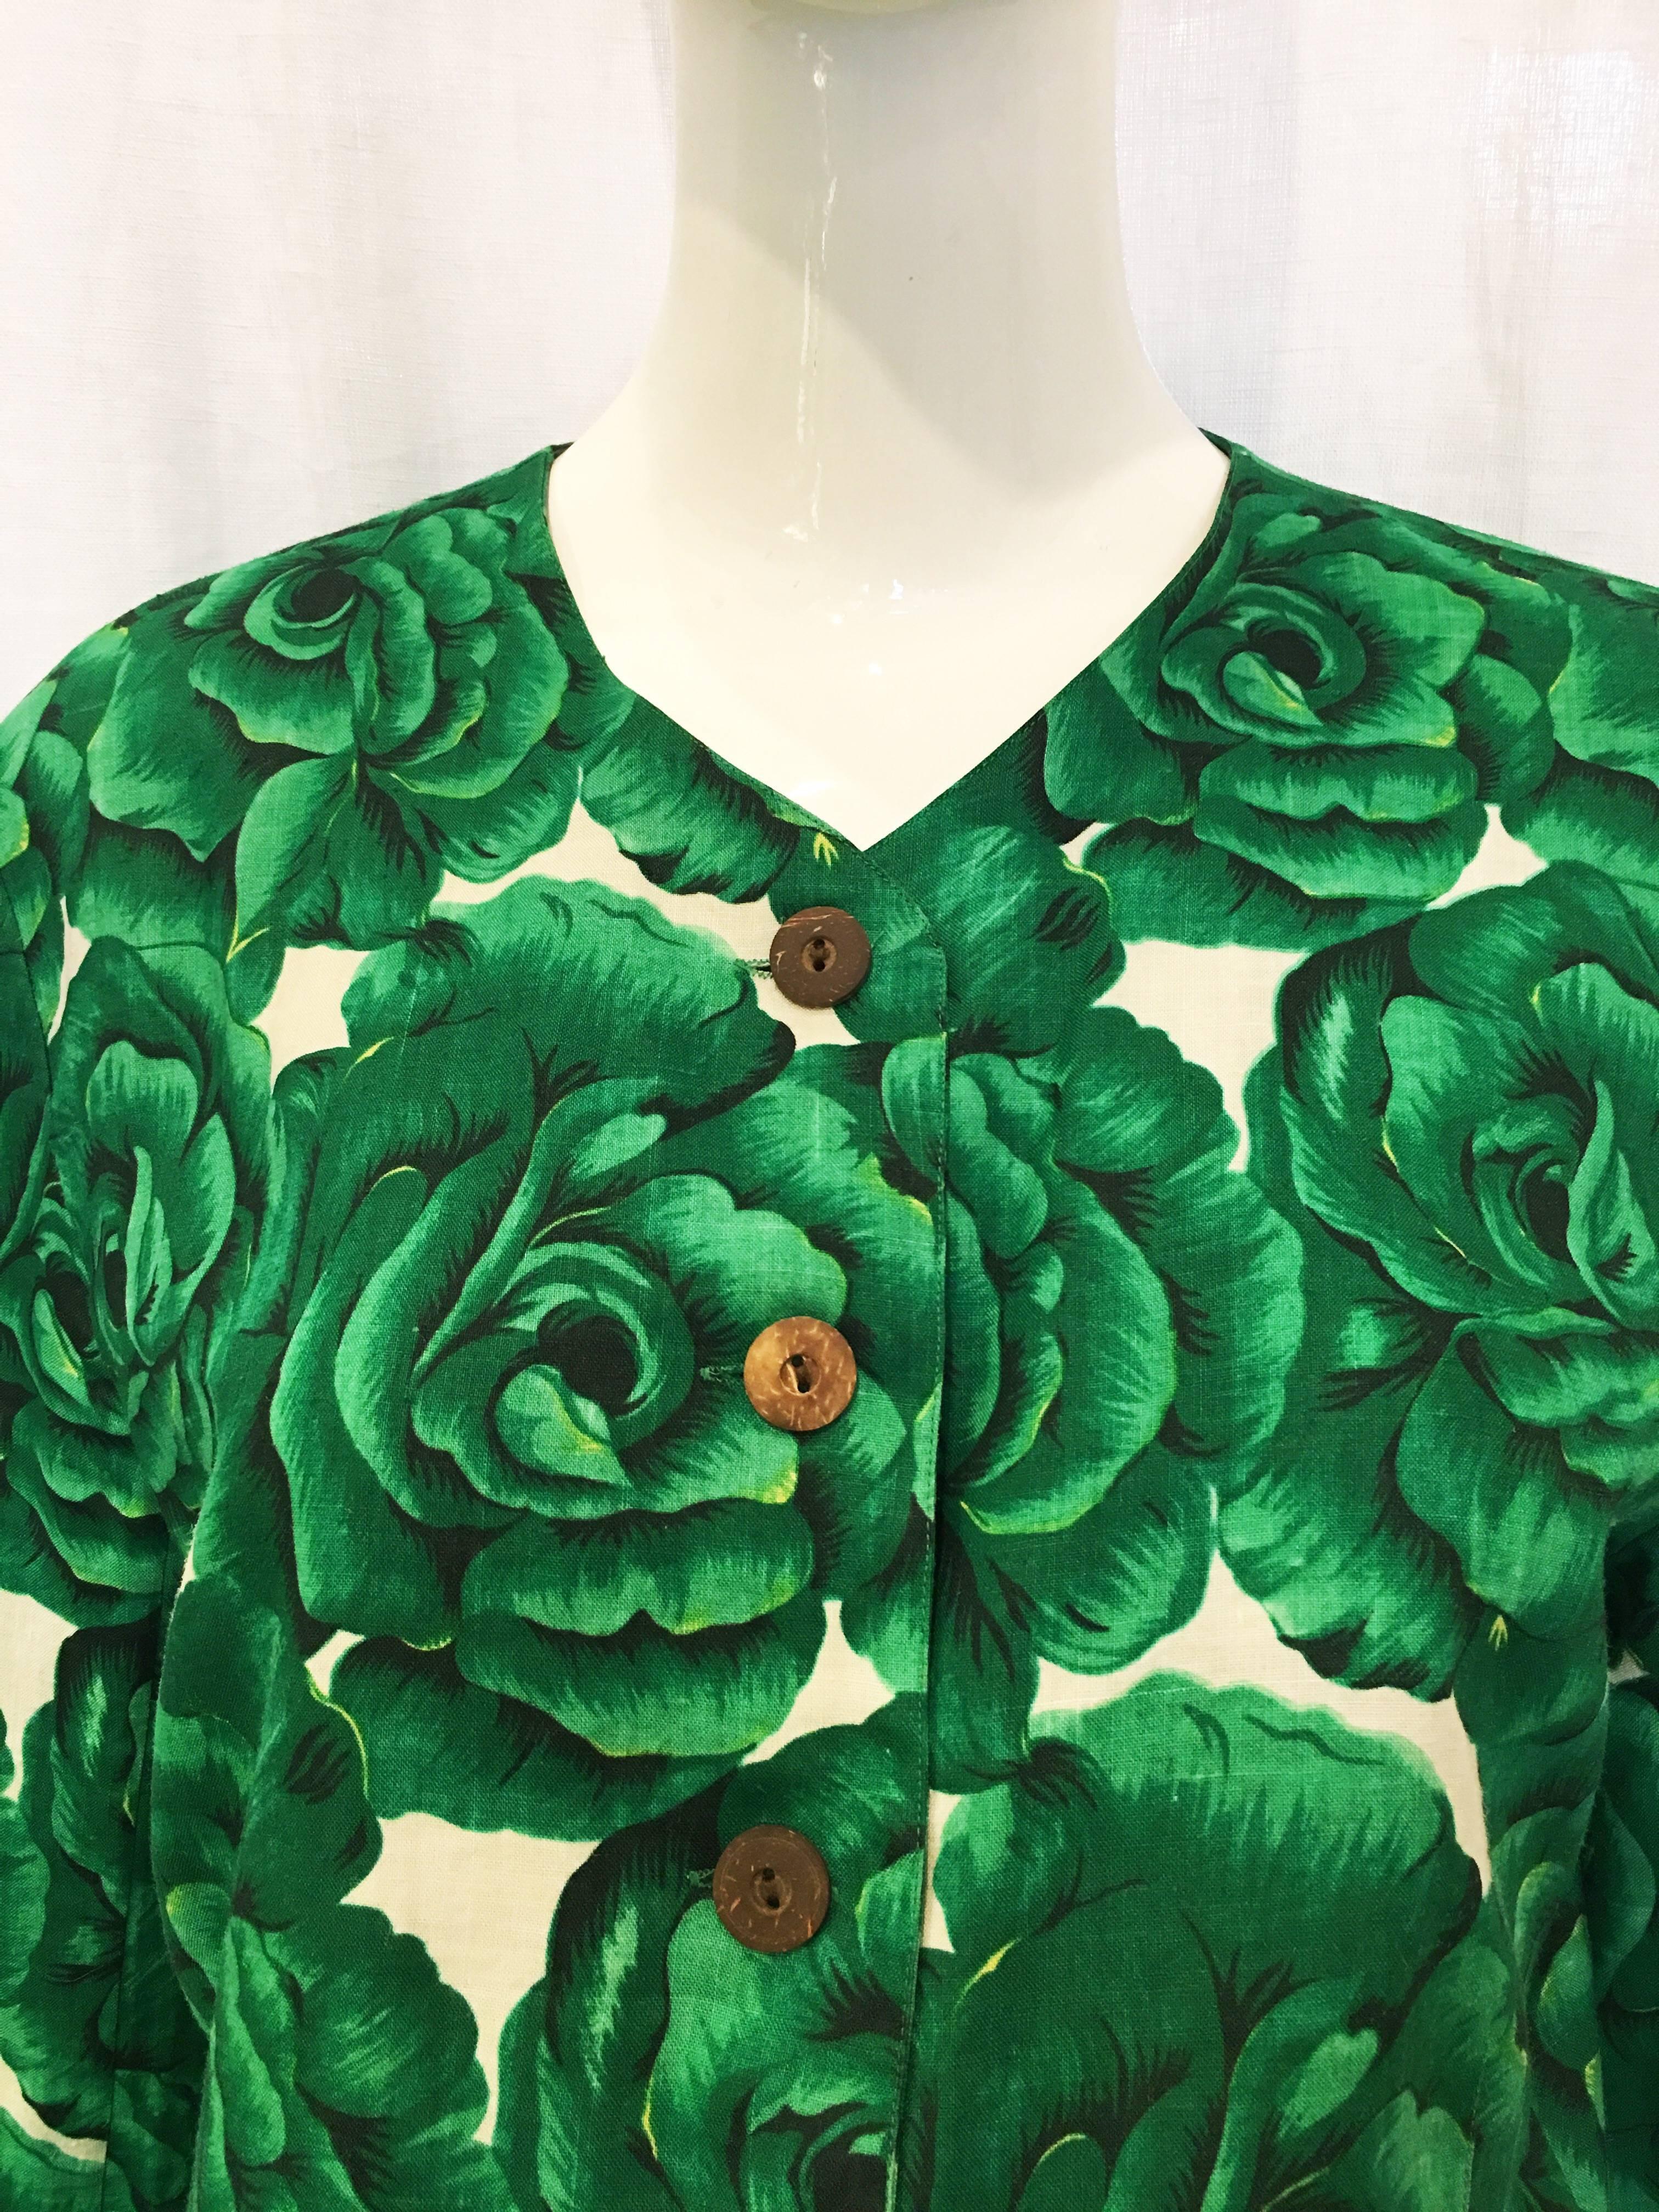 Lightweight white collarless jacket with all-over green rose print. Six wooden buttons down the front as well as two front pockets. Three decorative wooden buttons at cuffs of sleeves. A bright accompaniment to a springtime work ensemble or as a